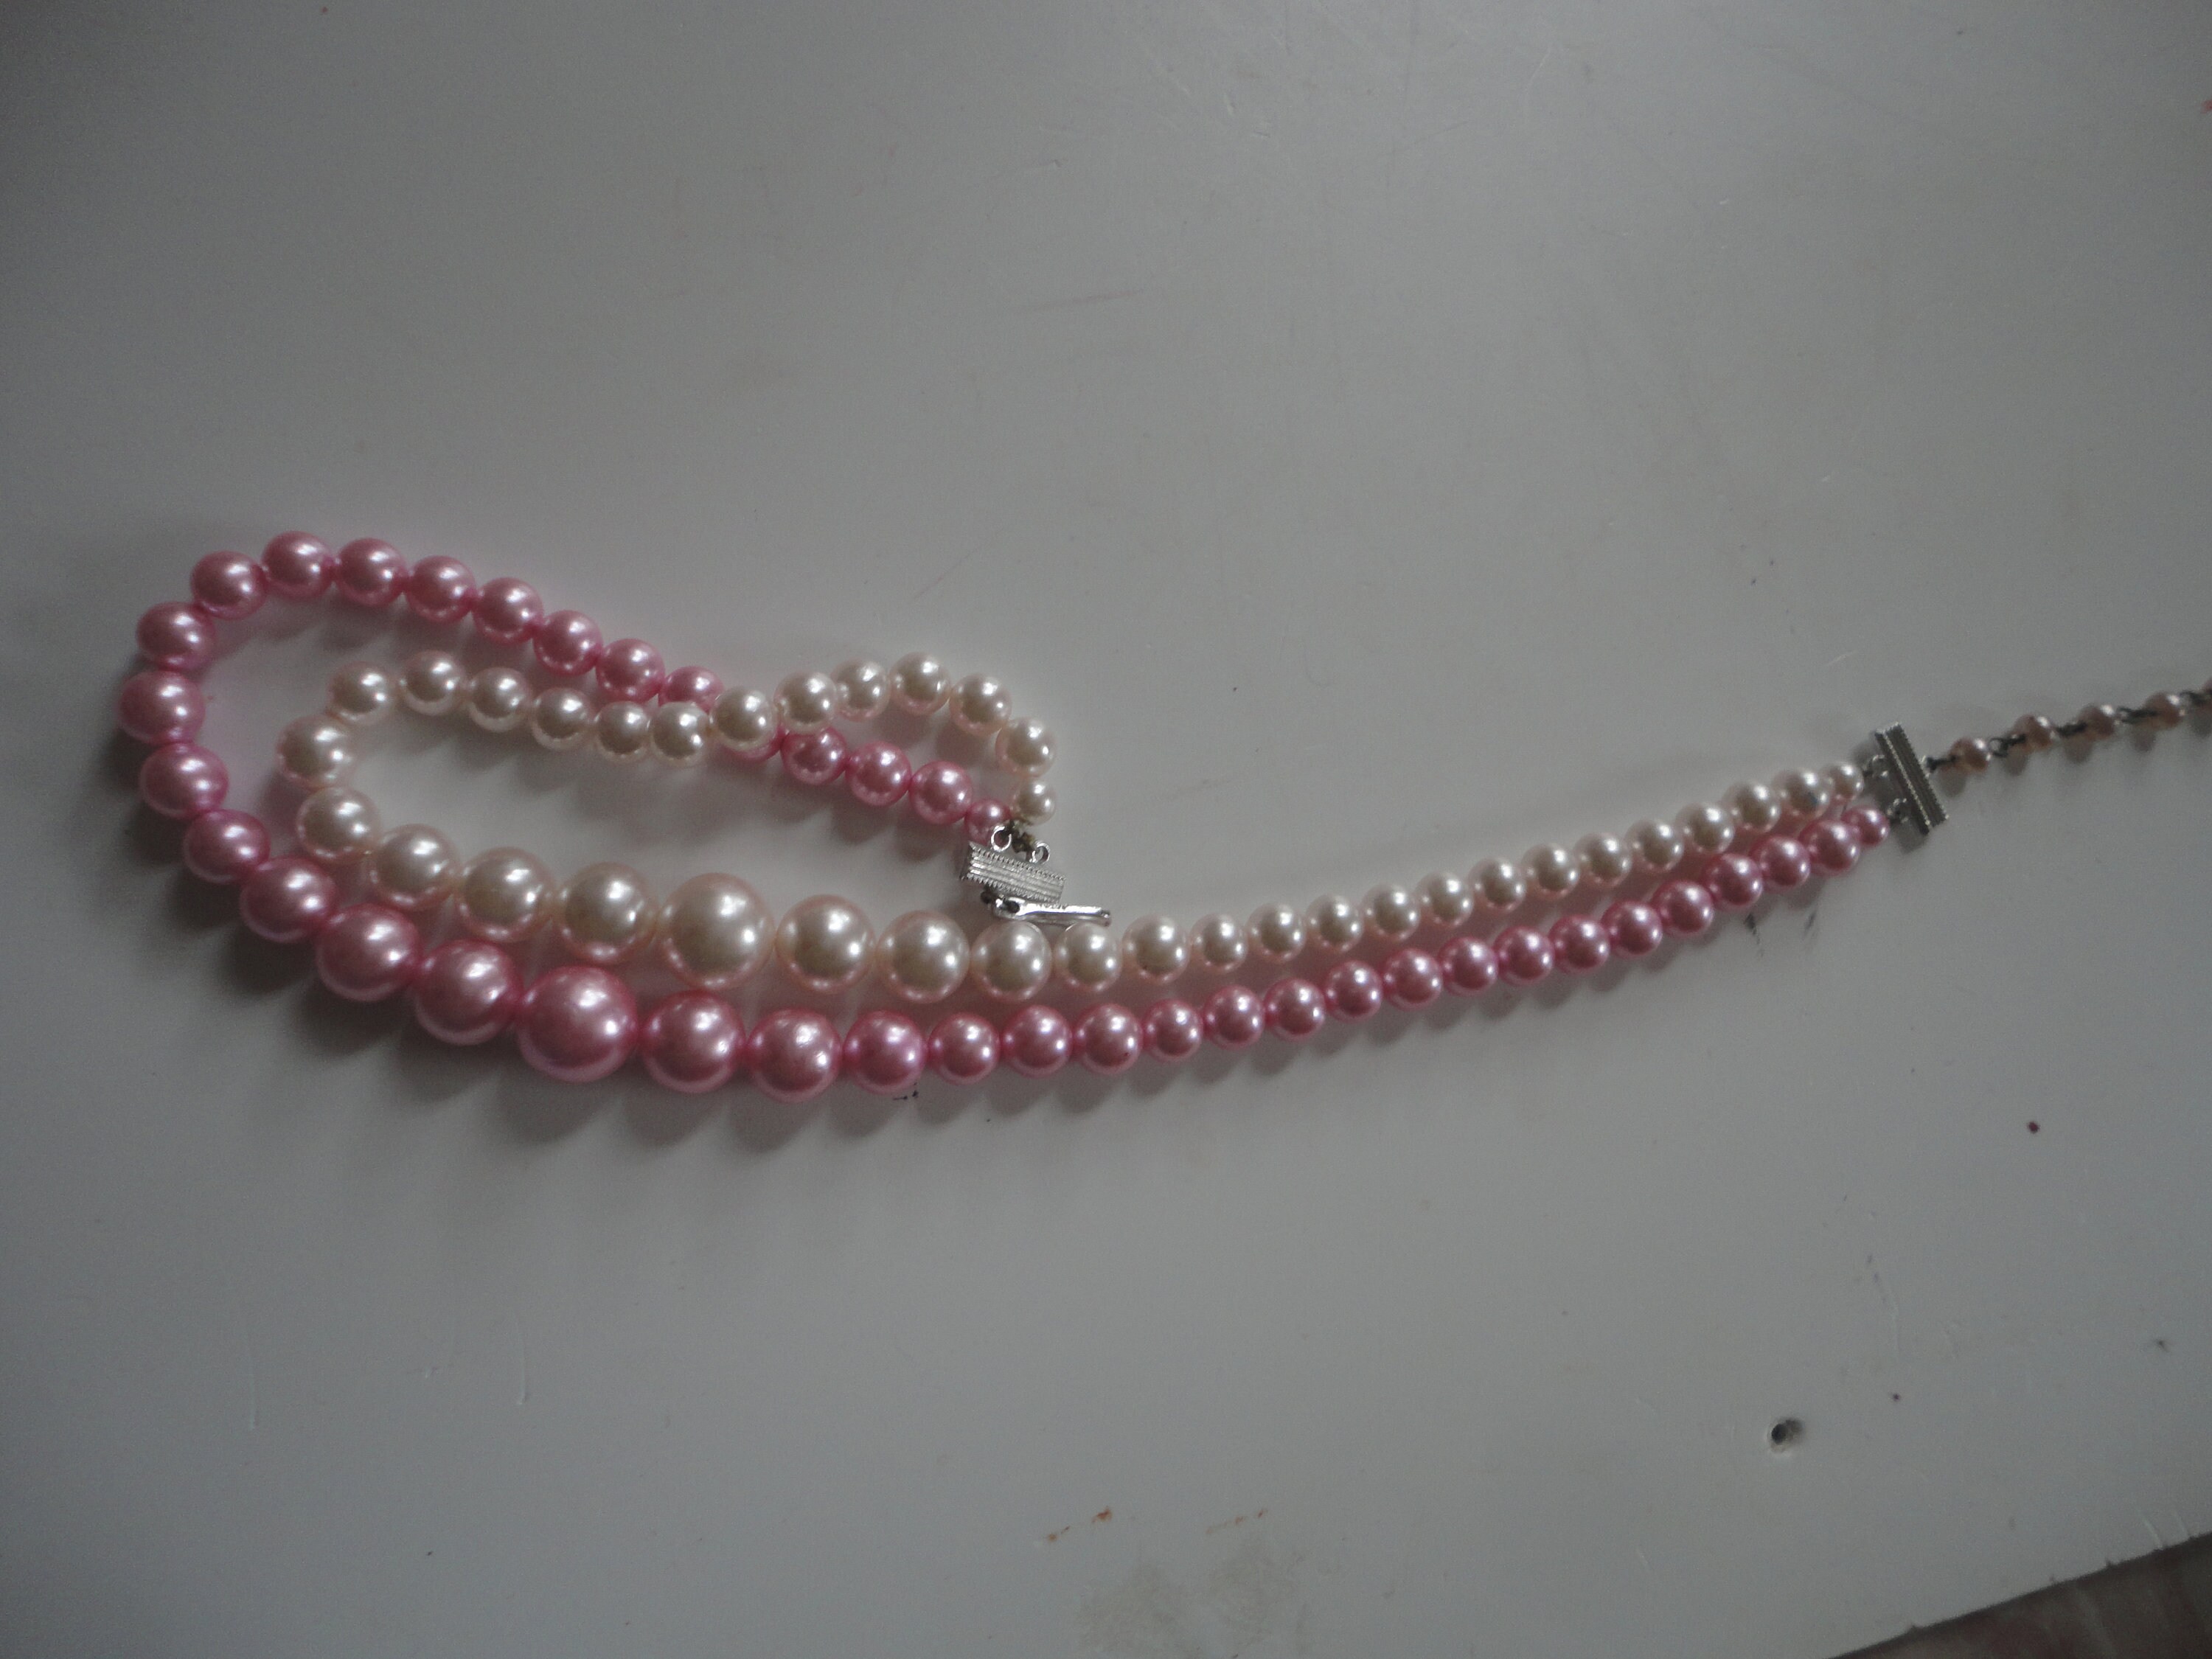 Faux Pearl and Pink Crystal Two Strand Necklace - Vintage Renude